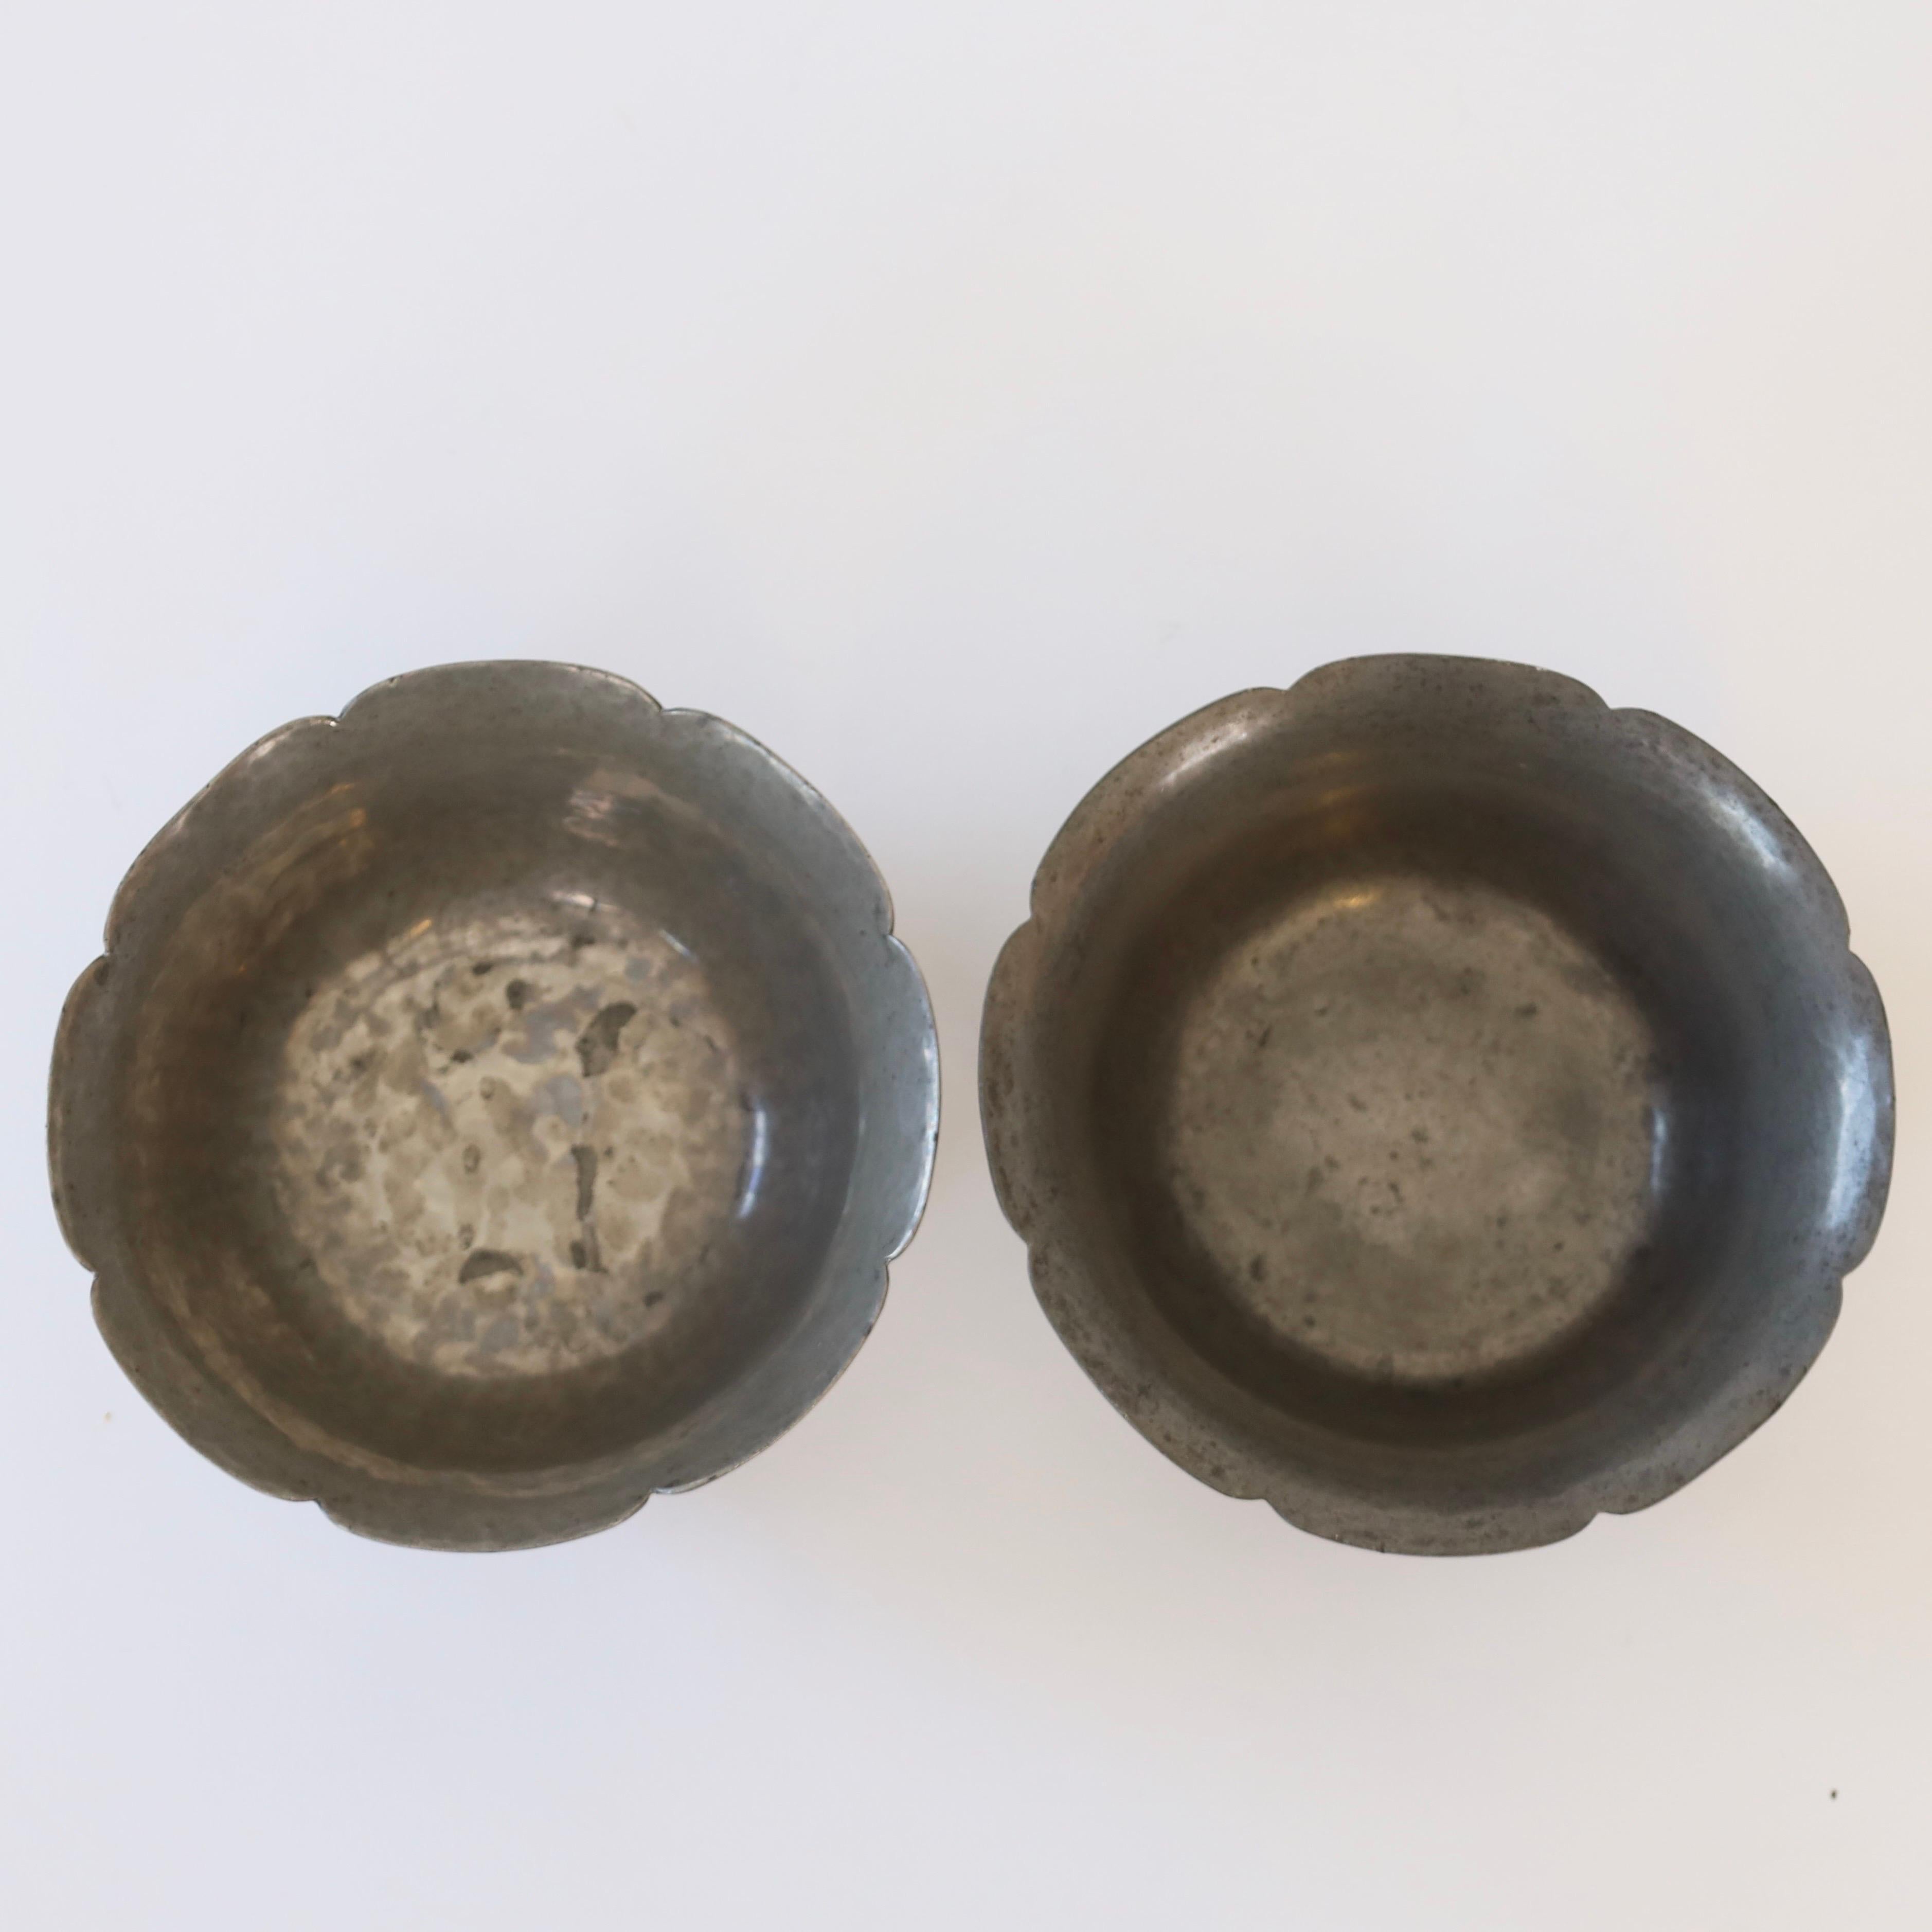 Pewter Set of hammered pewter bowls by Just Andersen, 1920s, Denmark For Sale